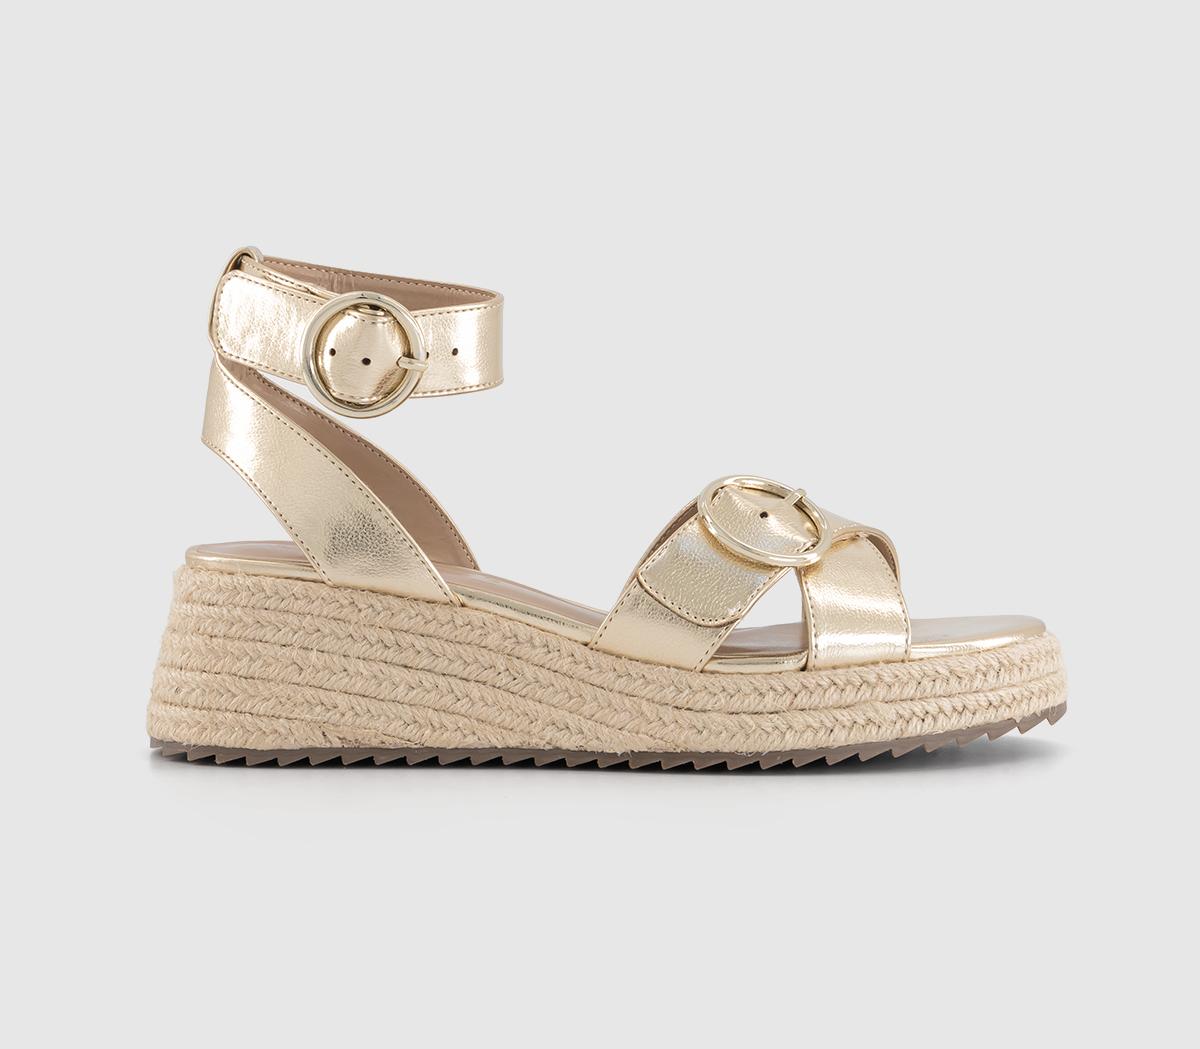 OFFICEMarcella Double Buckle Espadrille WedgesGold